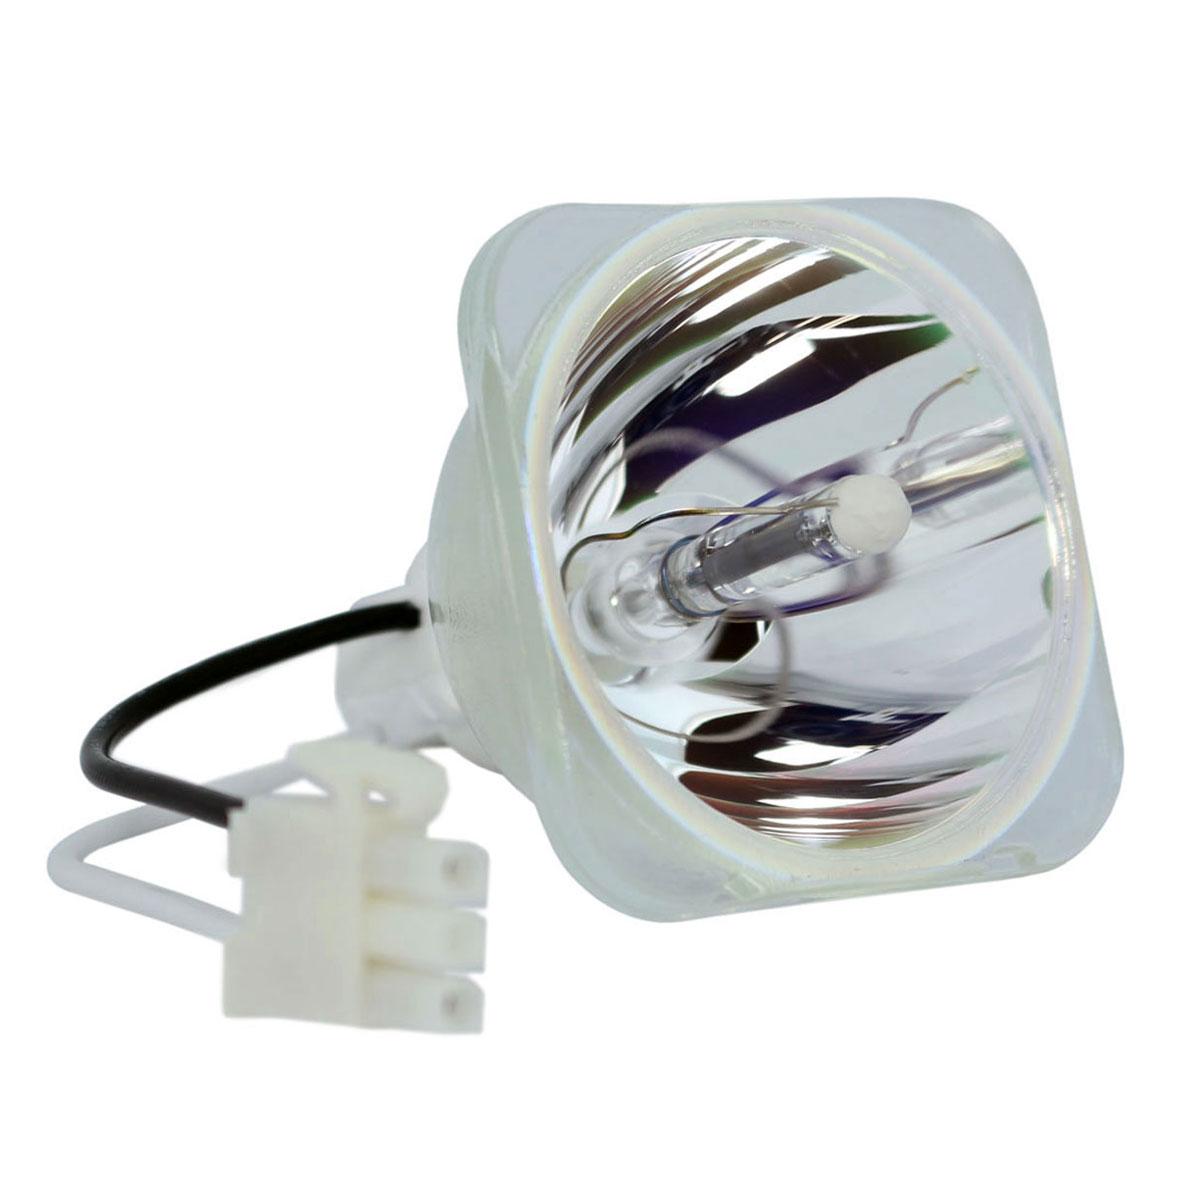 Lutema Economy Bulb for BenQ 5J.J4S05.001 Projector (Lamp Only) - image 2 of 6